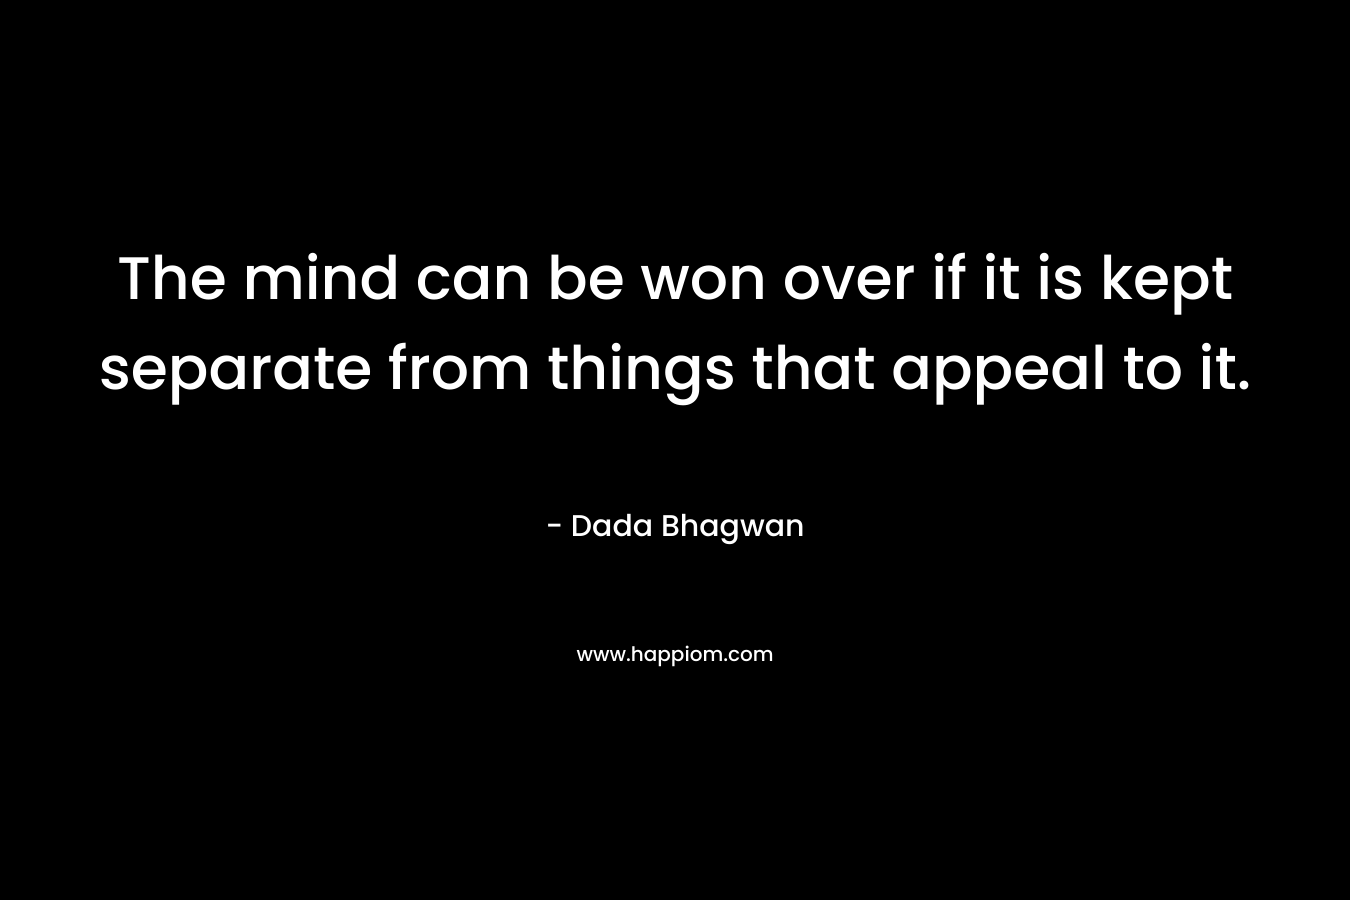 The mind can be won over if it is kept separate from things that appeal to it.